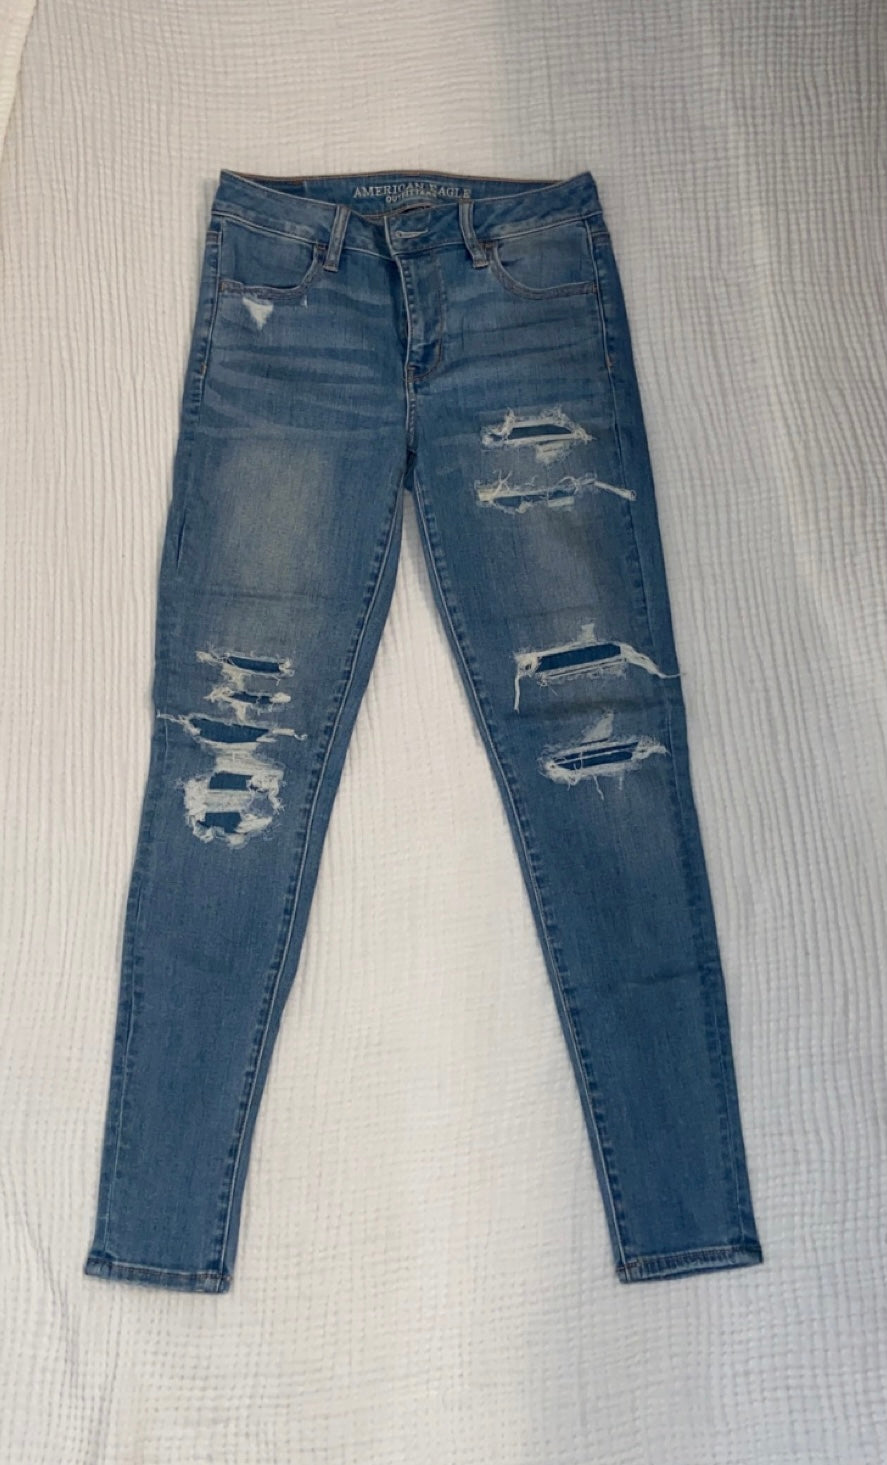 AE Distressed Jeans - Women Small (6)